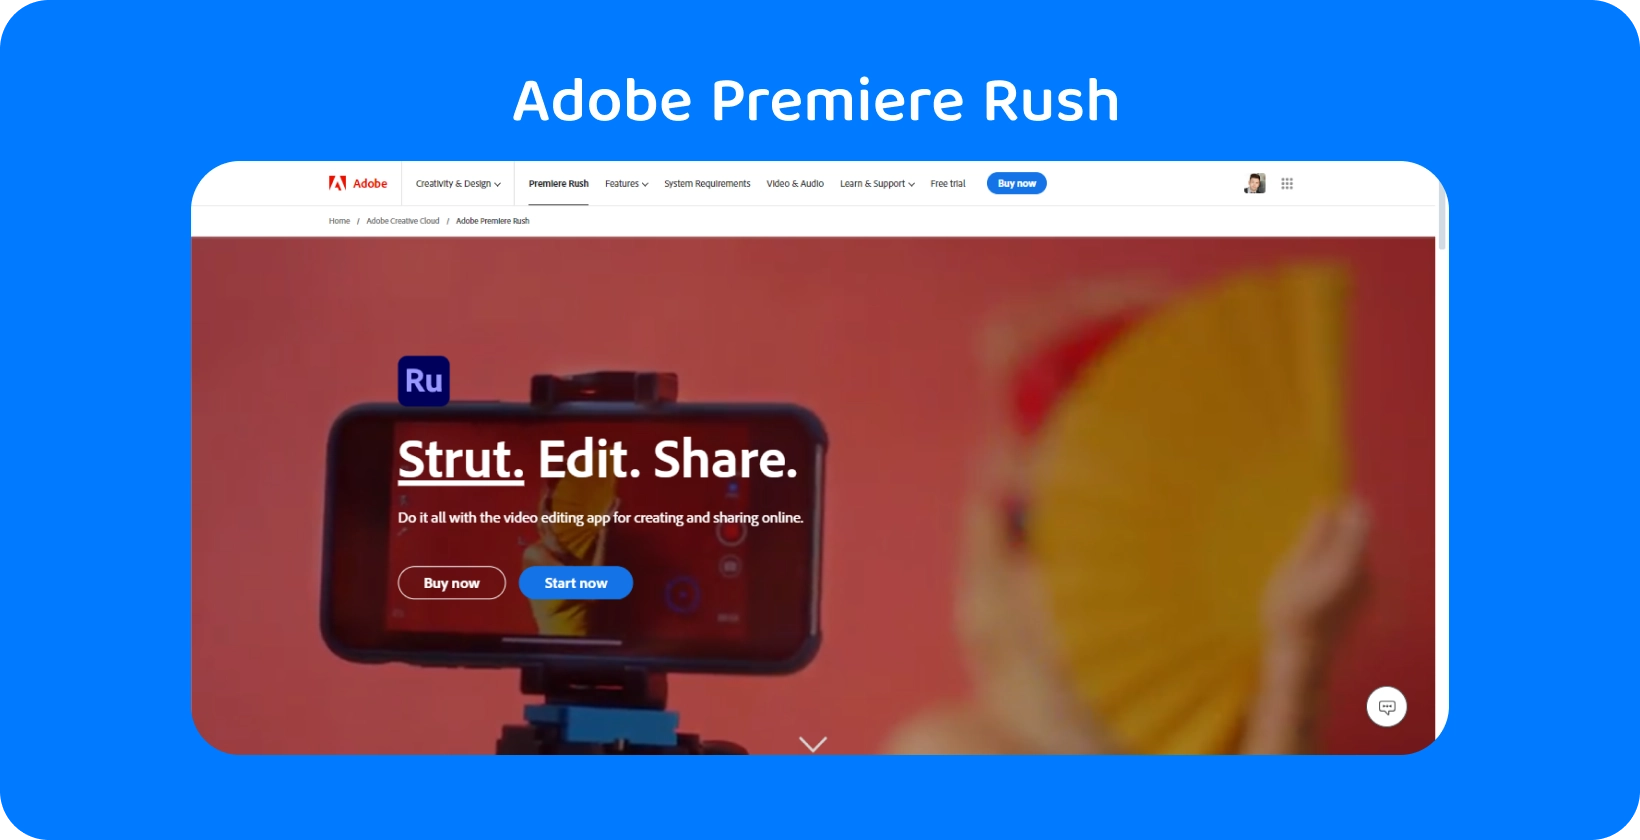 Adobe Premiere Rush on a smartphone mounted on a tripod with the slogan 'Strut. Edit. Share.' for video editing.